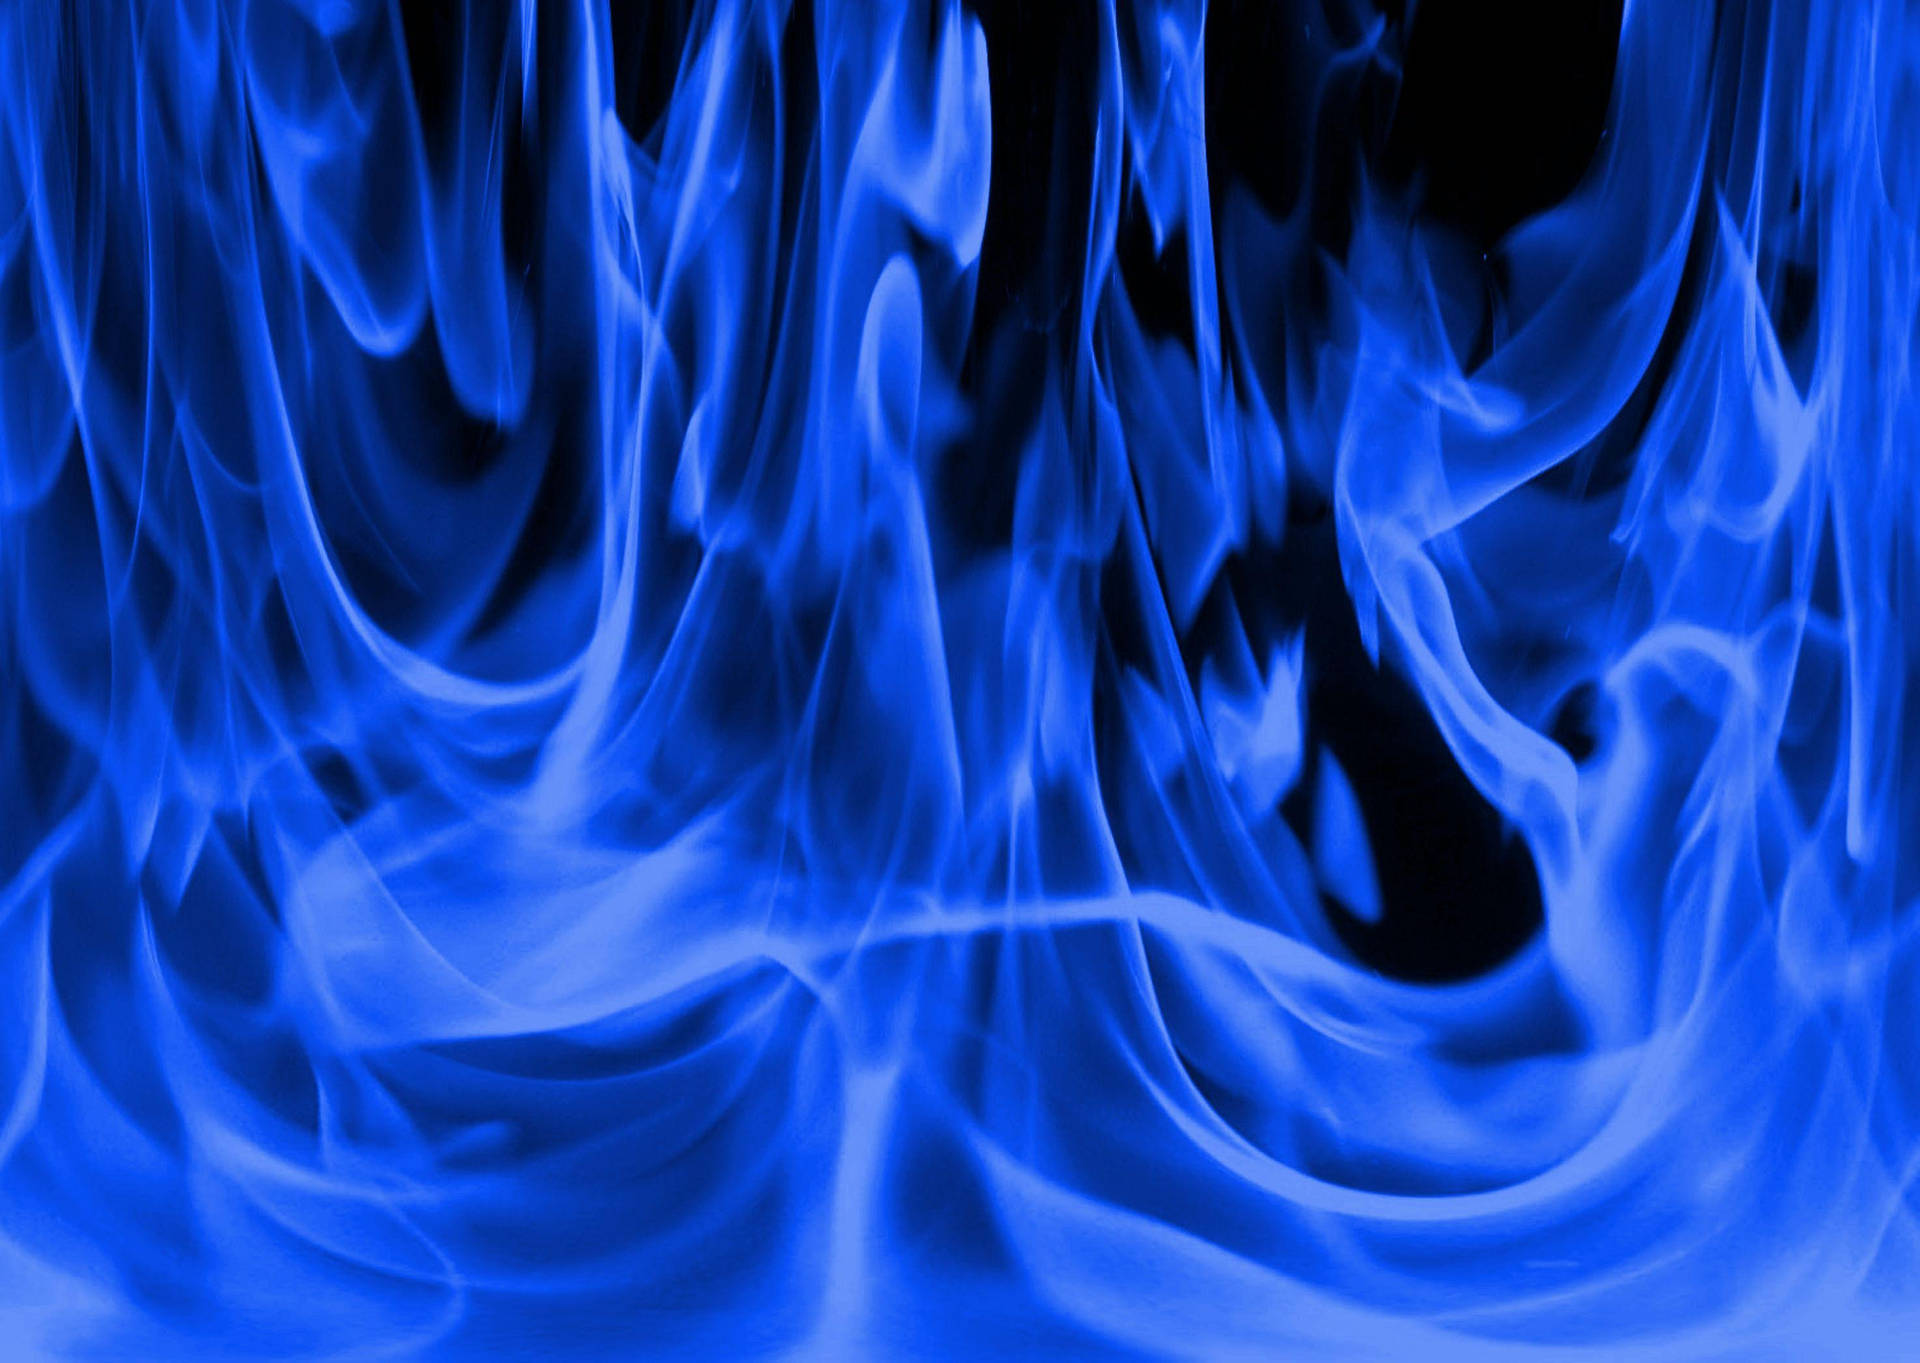 Free Blue Flame Wallpaper Downloads, [100+] Blue Flame Wallpapers for FREE  